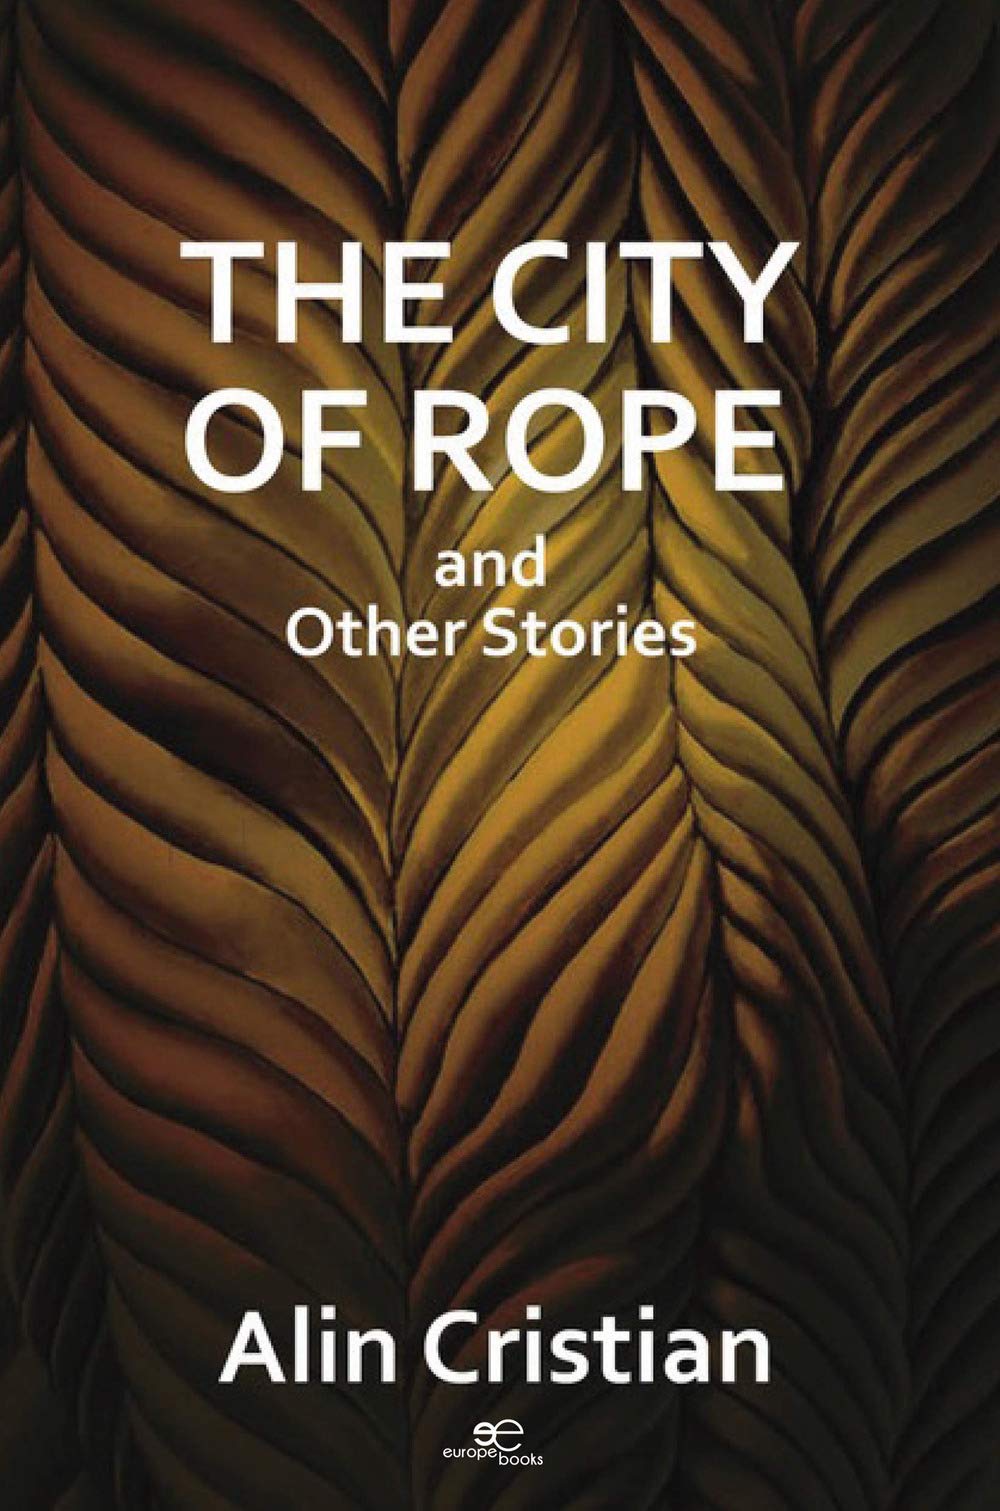 The City of Rope